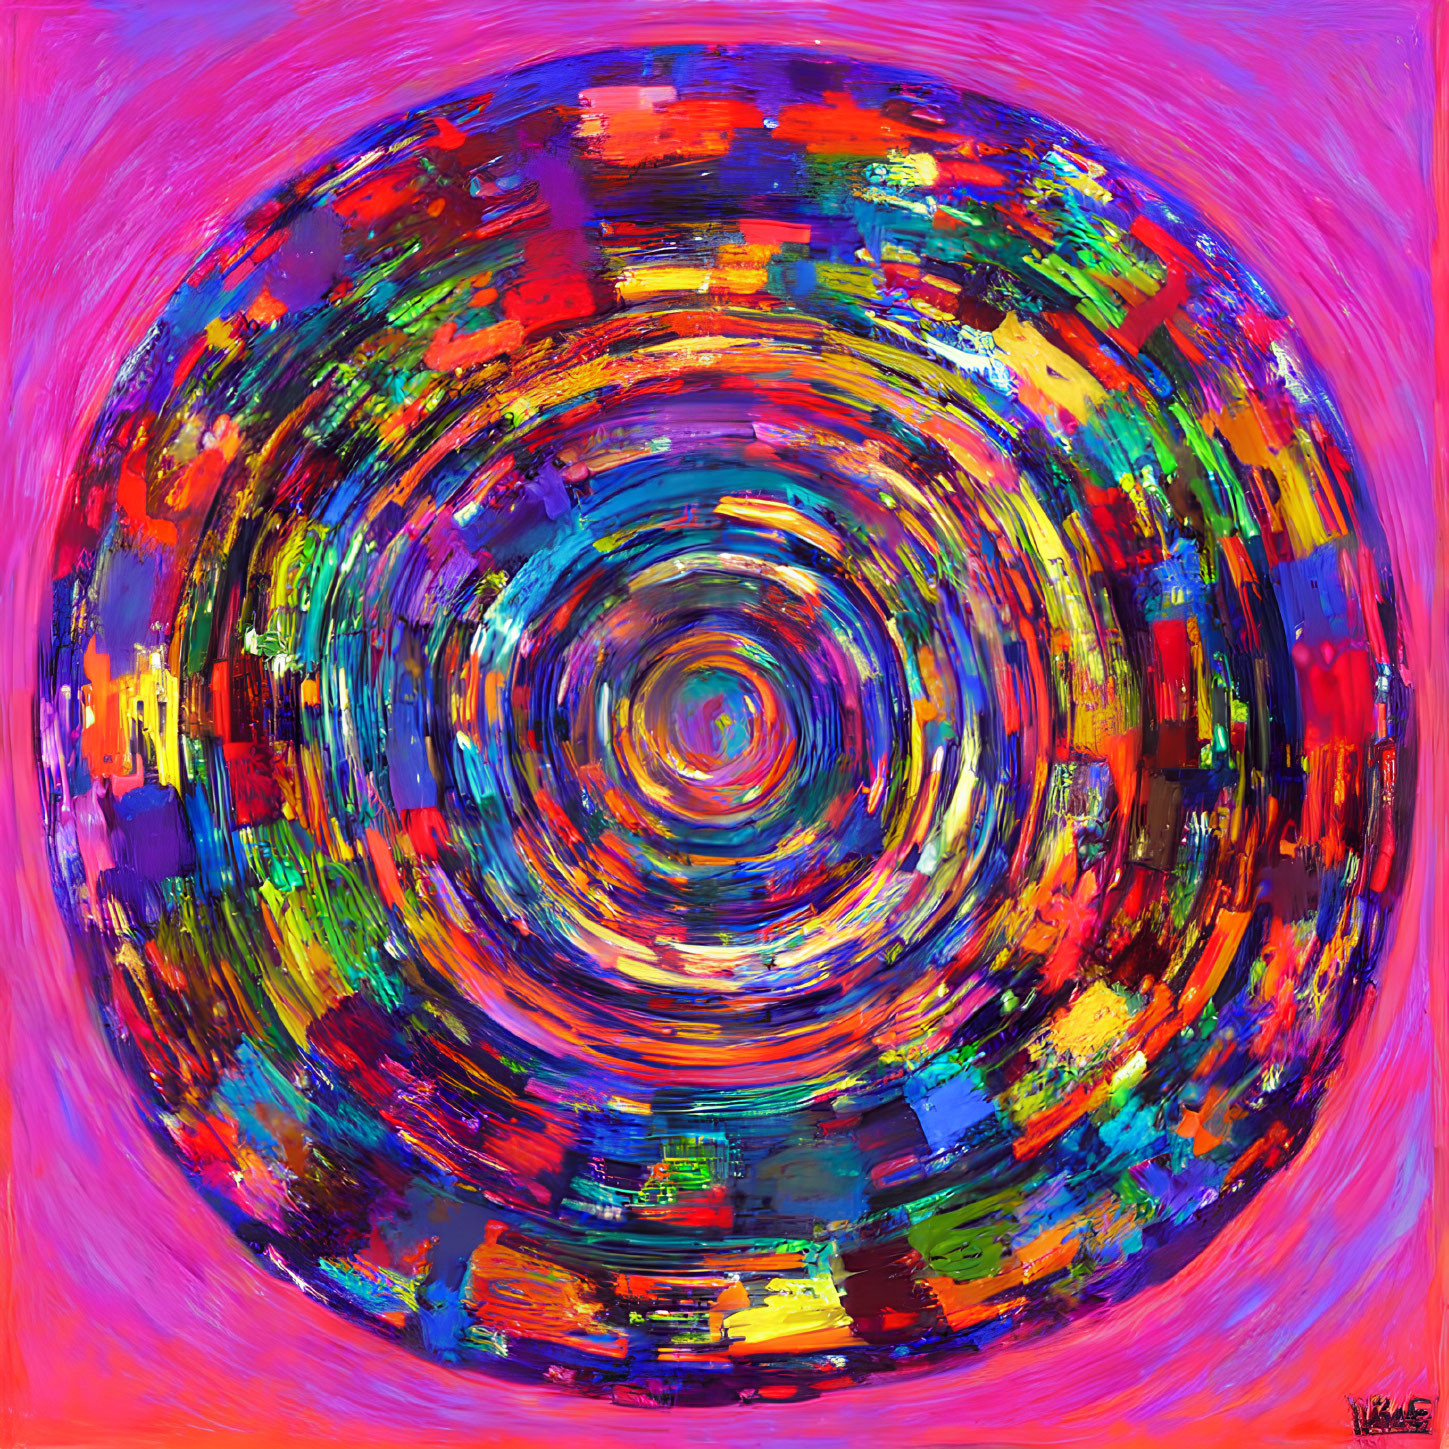 Colorful Abstract Painting with Swirling Blues, Reds, and Yellows on Pink Background